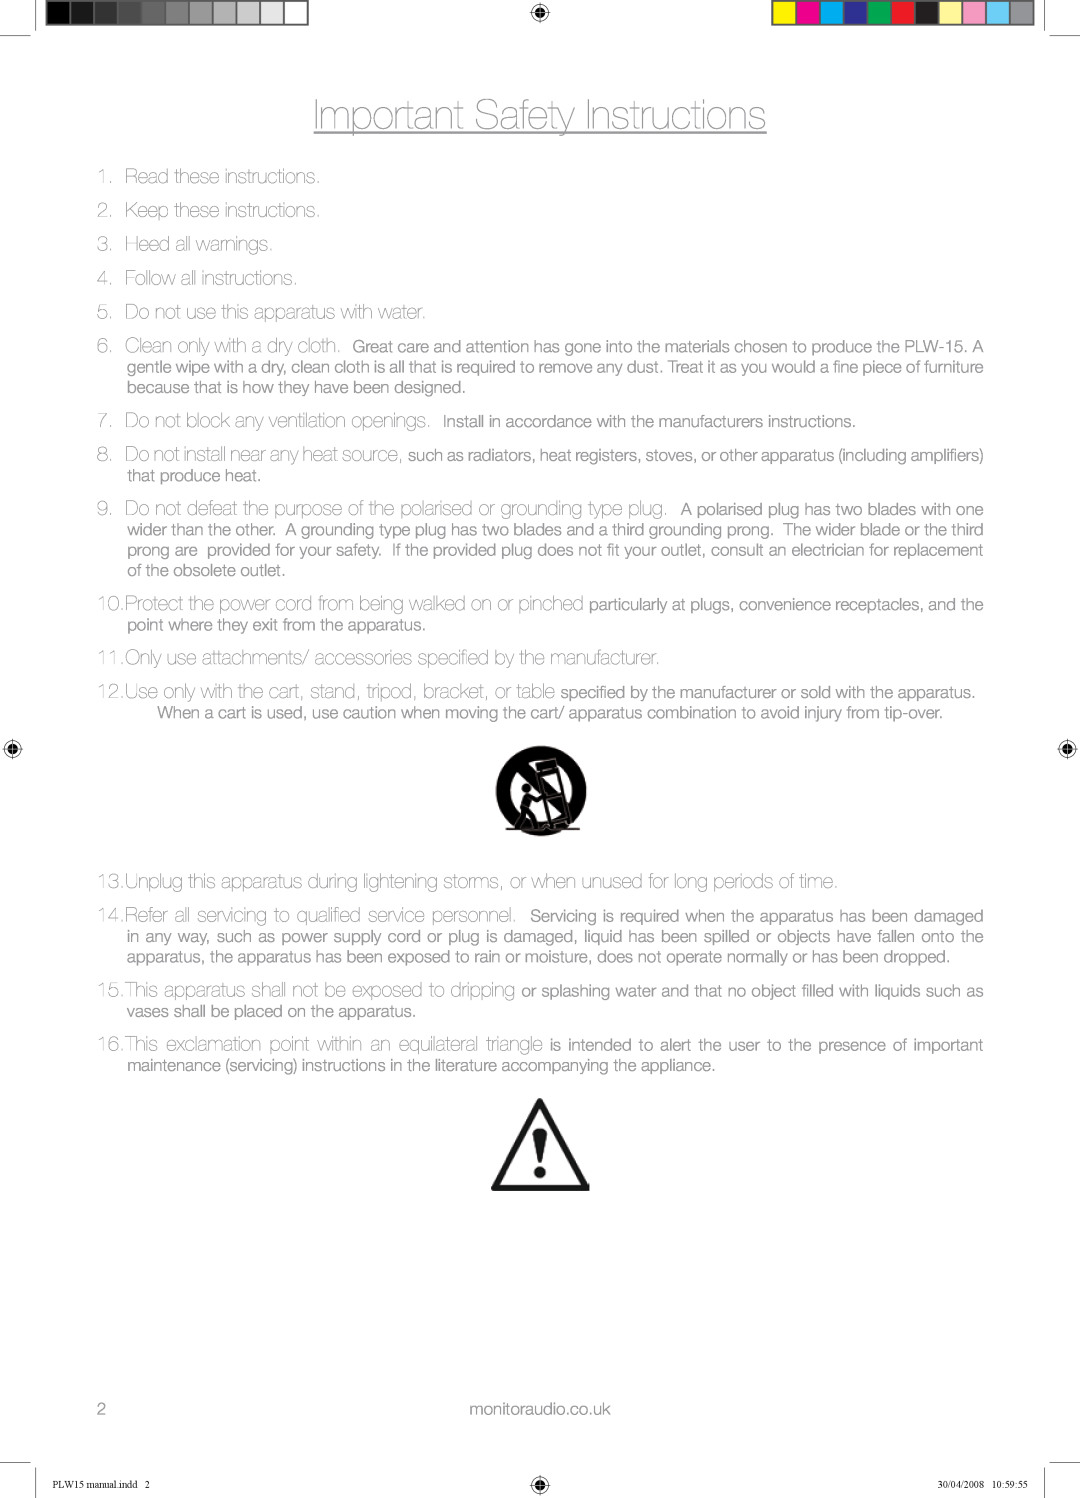 Monitor Audio PLW-15 Important Safety Instructions, Read these instructions, Keep these instructions 3.Heed all warnings 